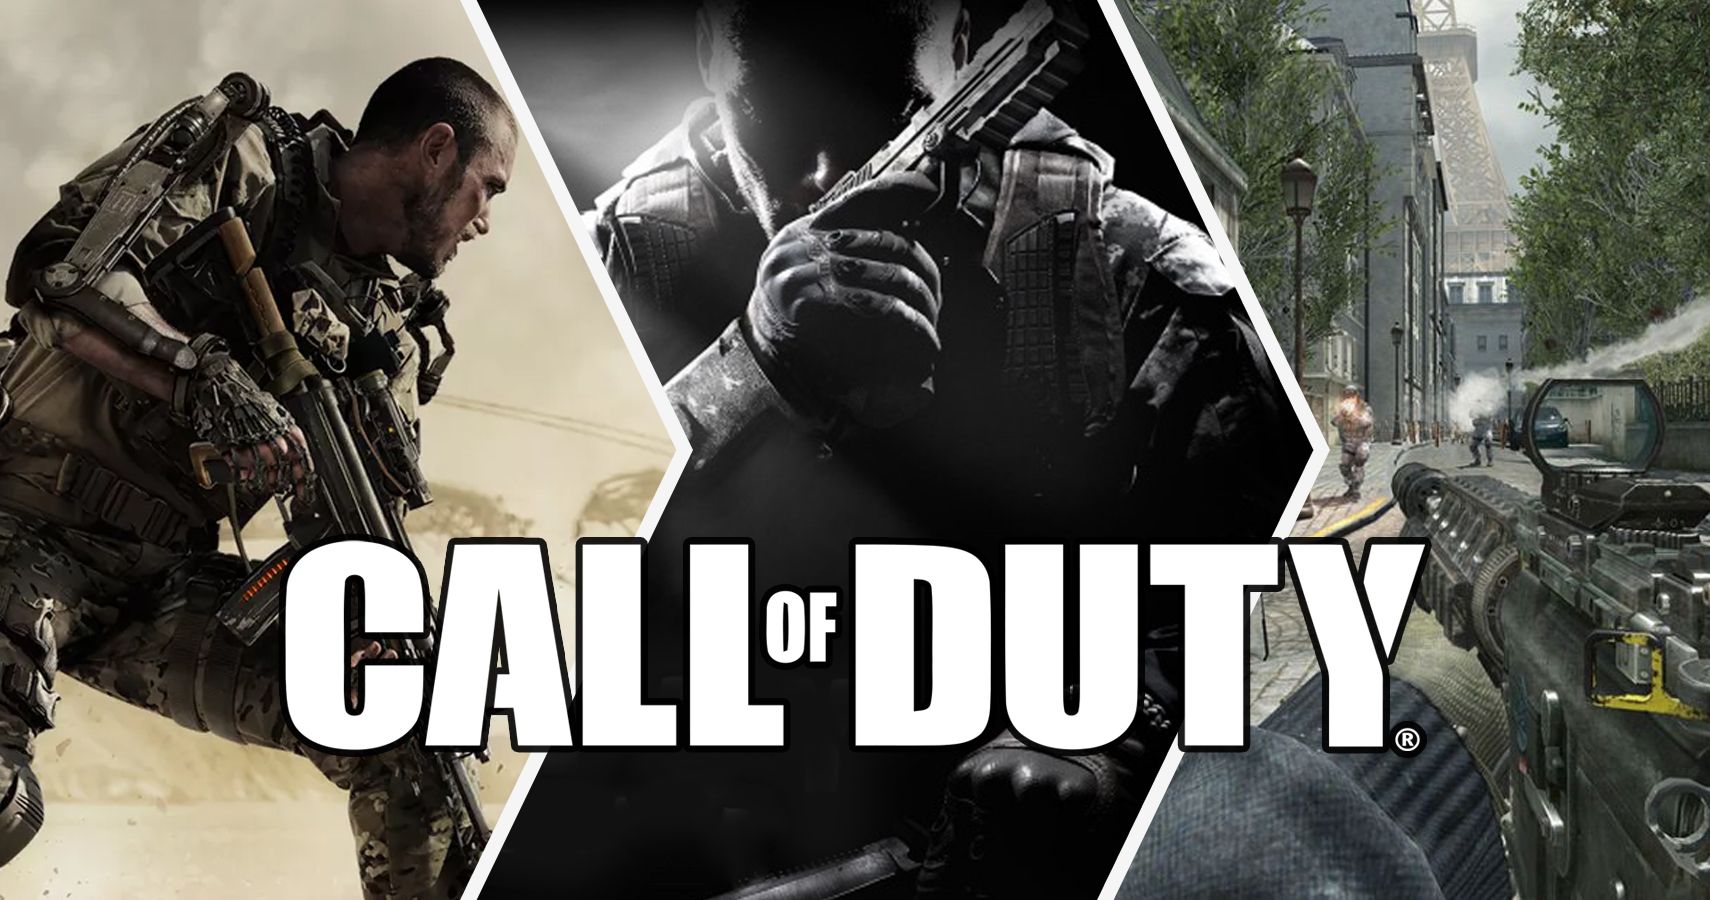 Xbox's Top 10 Bestselling Games Are Mostly Old Call Of Dutys